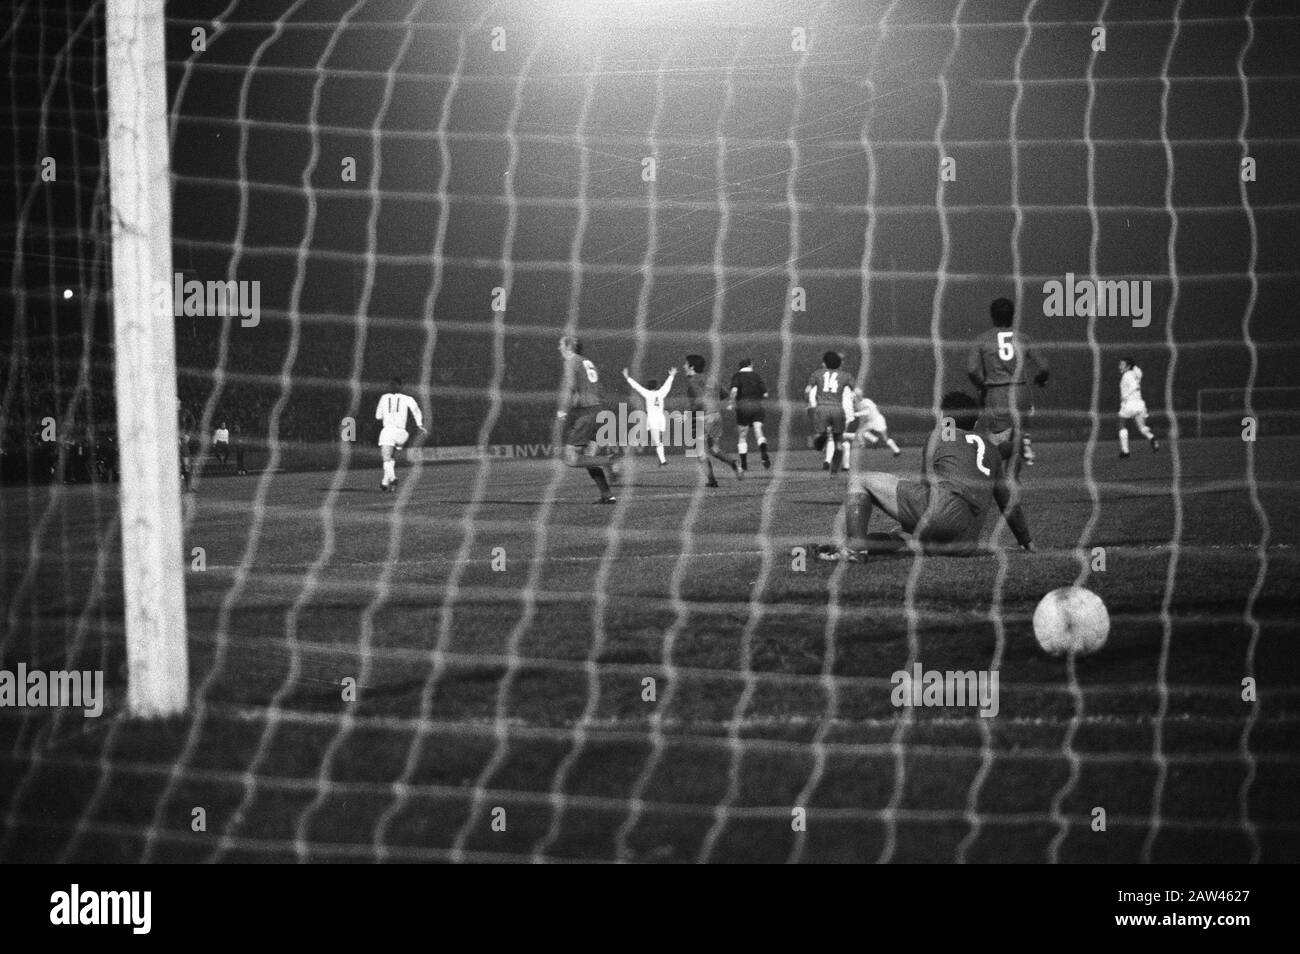 PSV 2-0 against Real Madrid, PSV-ers cheering after goal Hoekema (2-0) Annotation: Game was played at the stadium Vliert Den Bosch Date : november 3, 1971 Location: 's-Hertogenbosch Keywords: sport, football Institution Name: Real Madrid Stock Photo